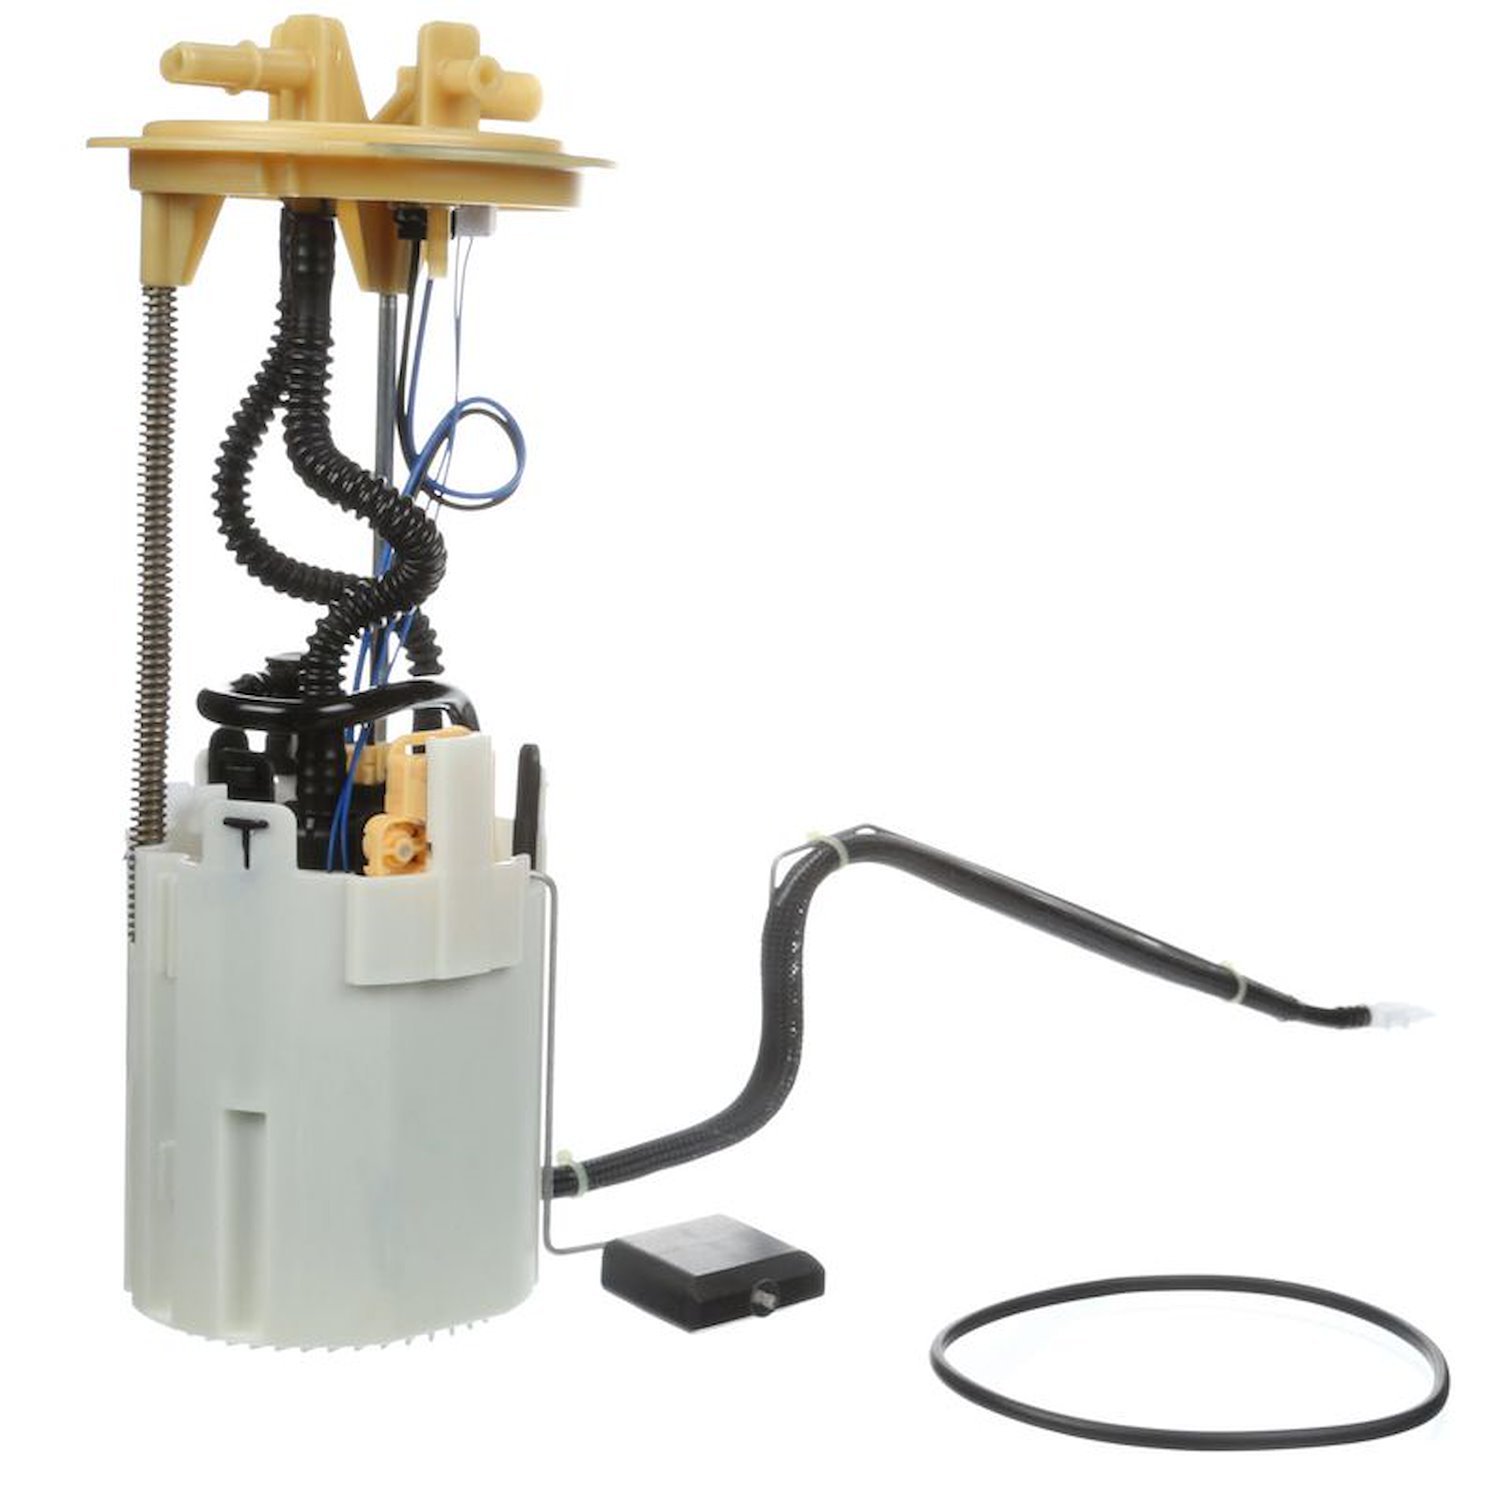 OE Chrysler/Dodge Replacement Fuel Pump Module Assembly for 2007-2009 Dodge Sprinter 2500/3500